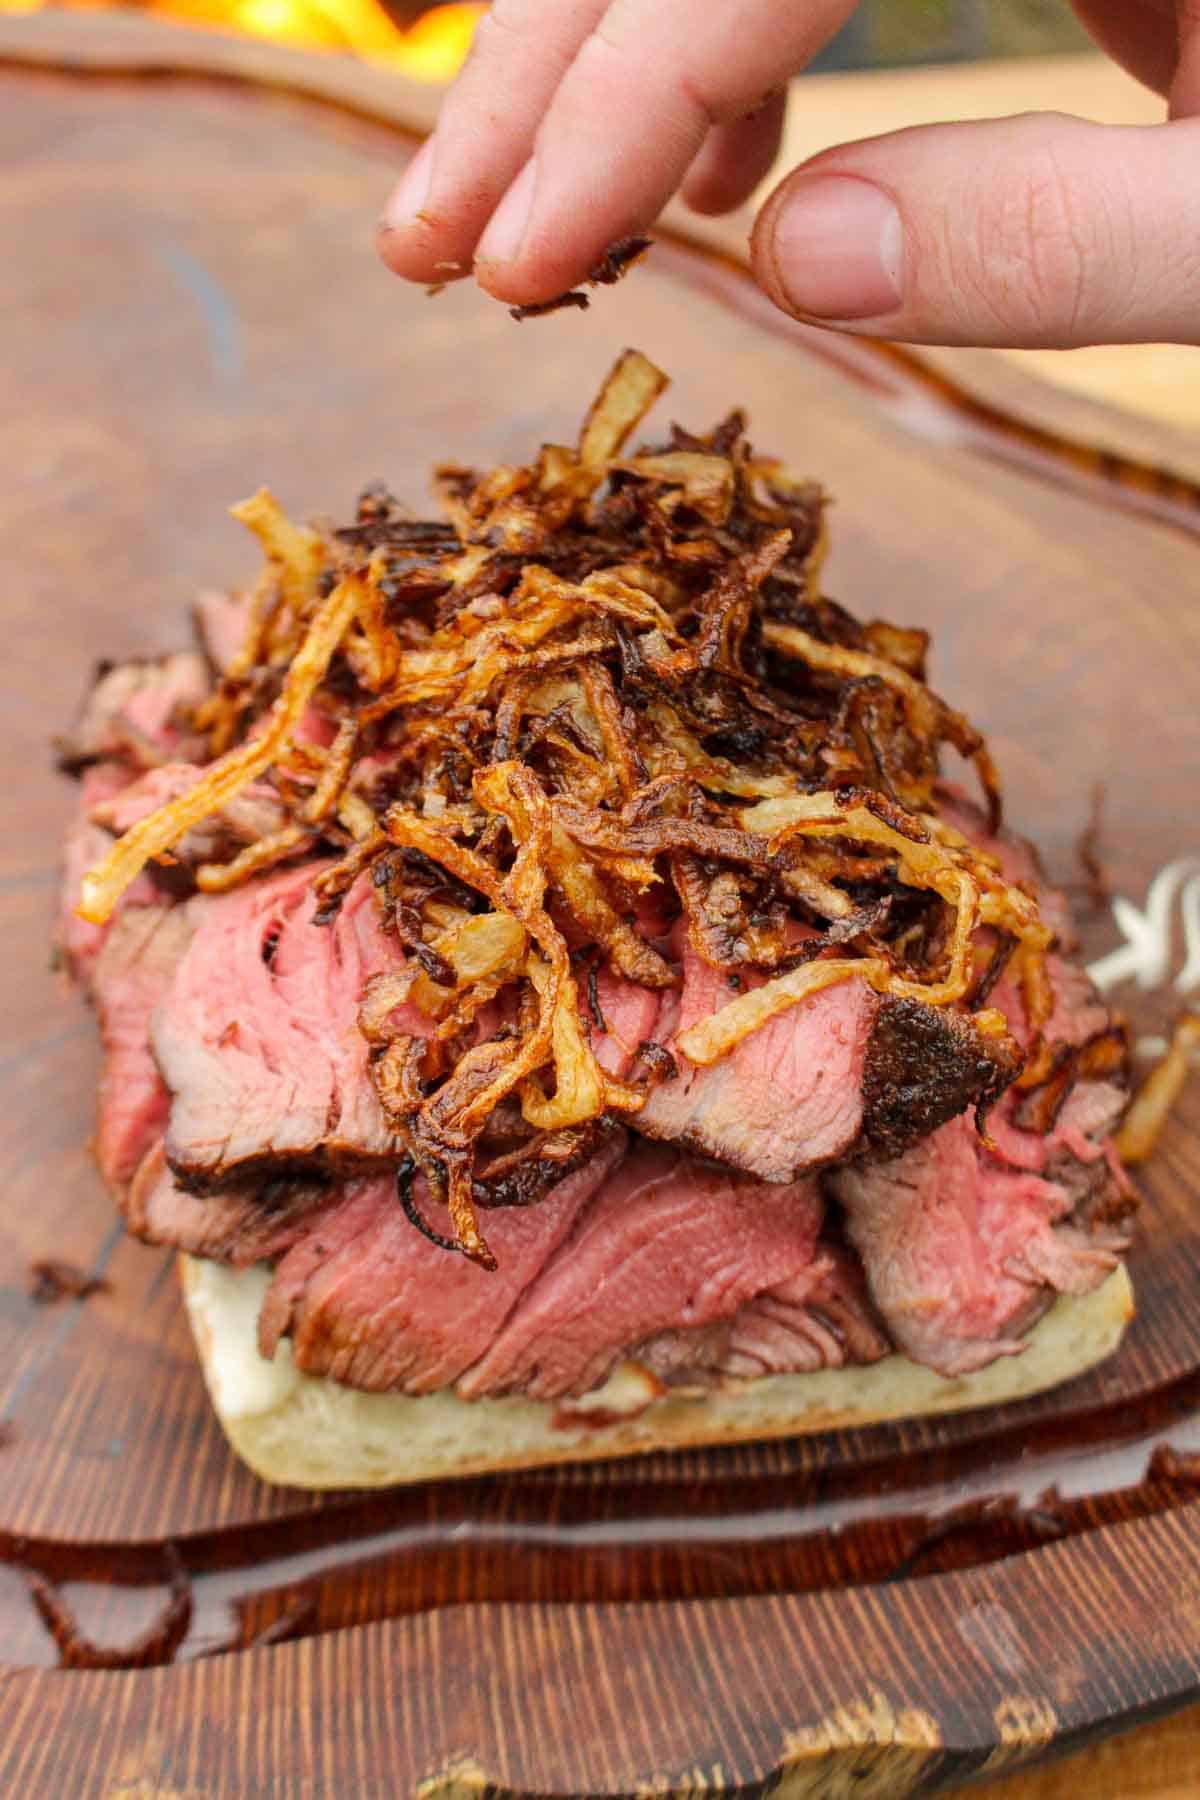 Placing the fried onions on the steak sandwich.